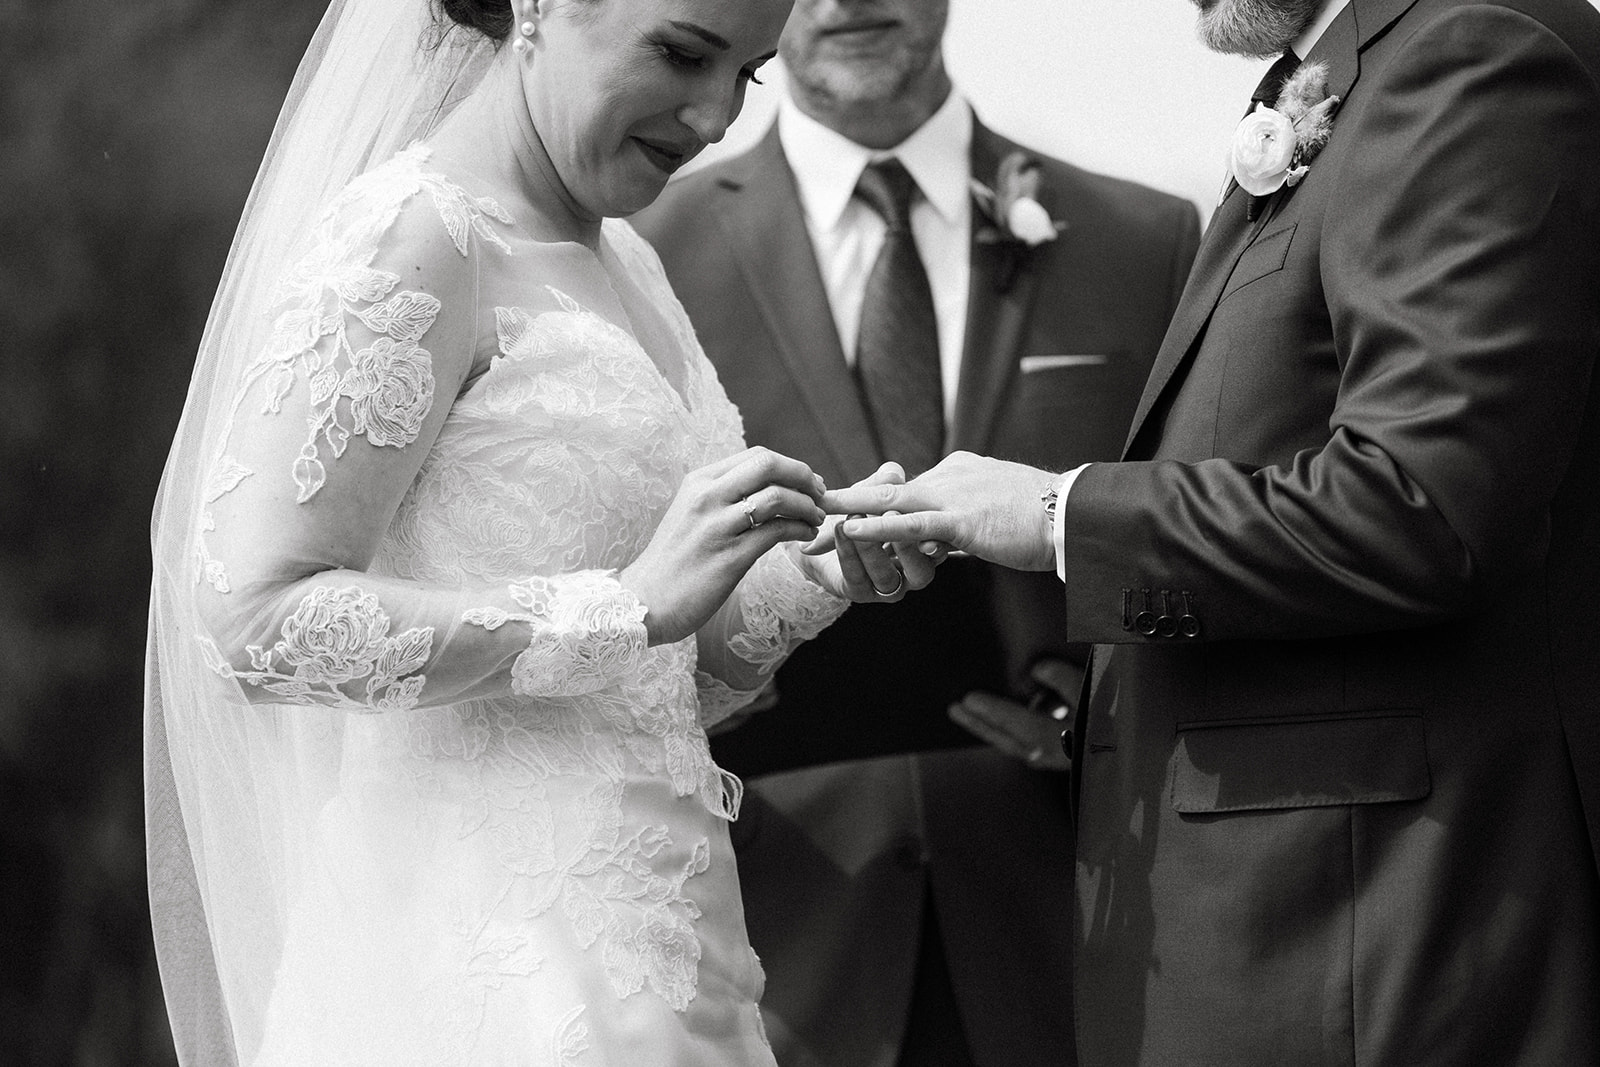 A bride and groom exchange wedding bands during their vow ceremony on a Jackson Hole ranch,
